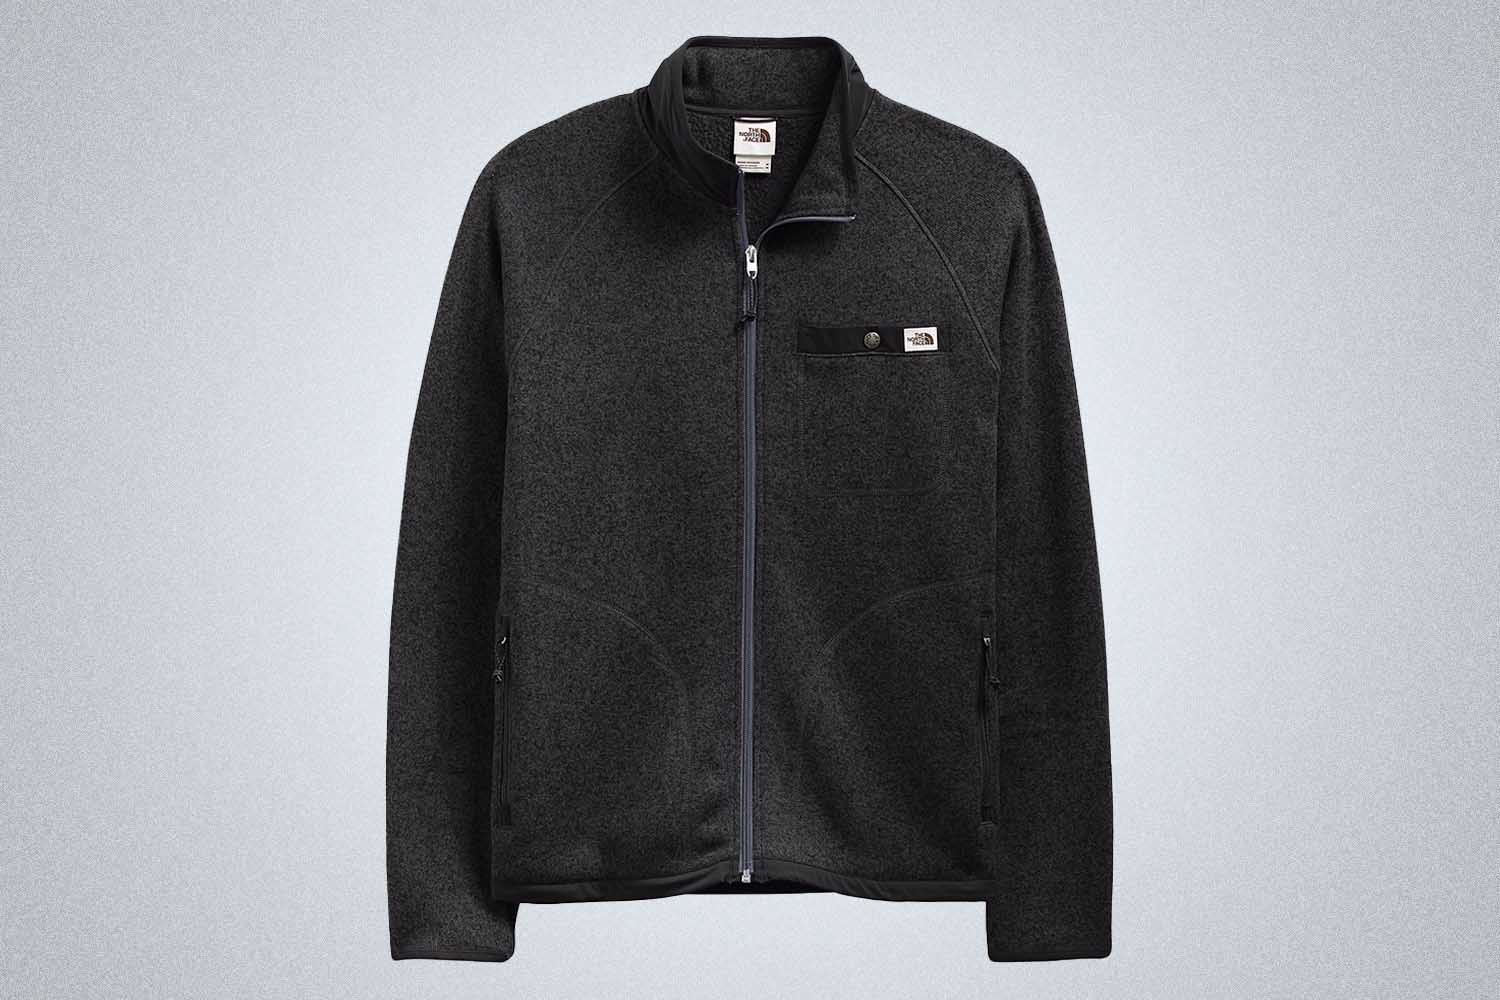 a black fleece jacket from The North Face on a grey background